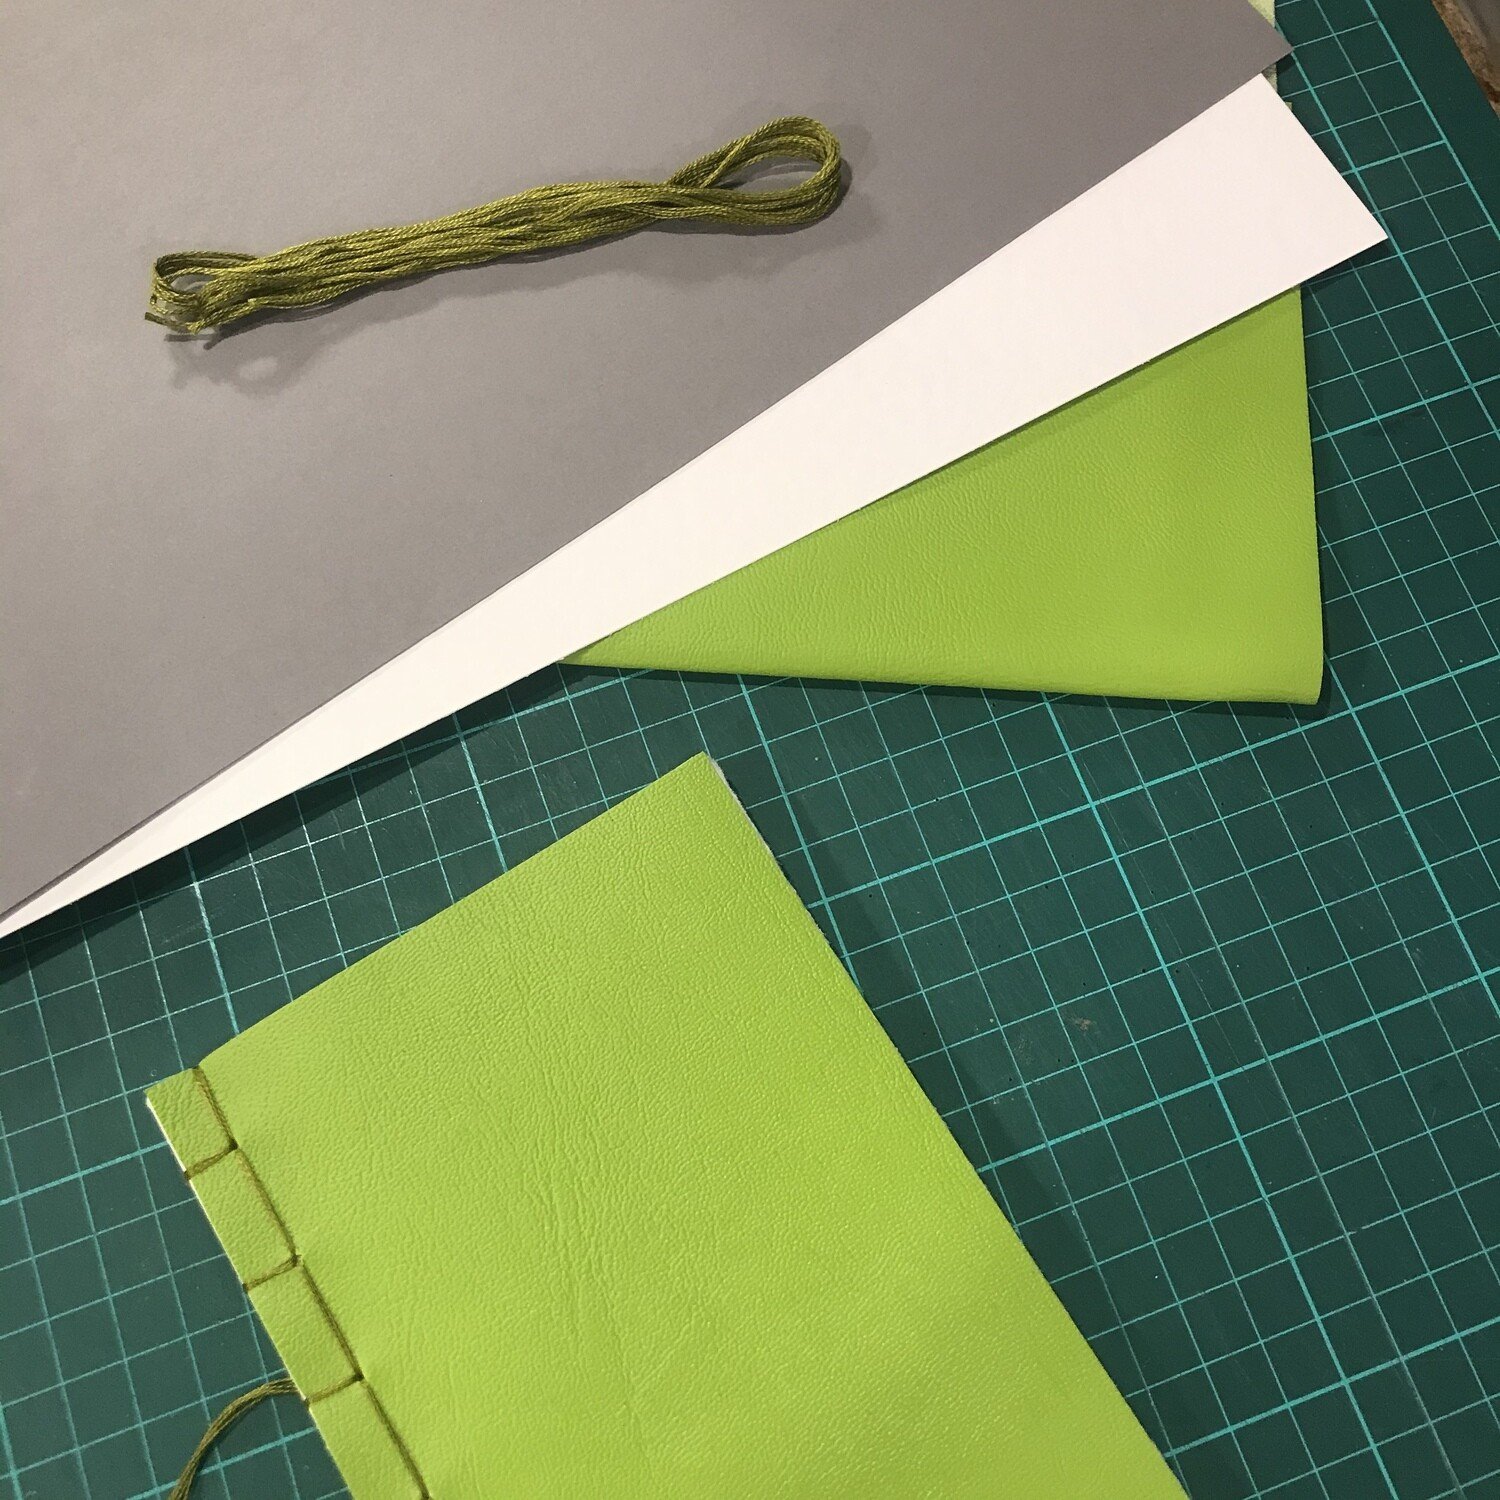 Art & Design Teacher CPD Course - Bookbinding - One to One - 1 Day